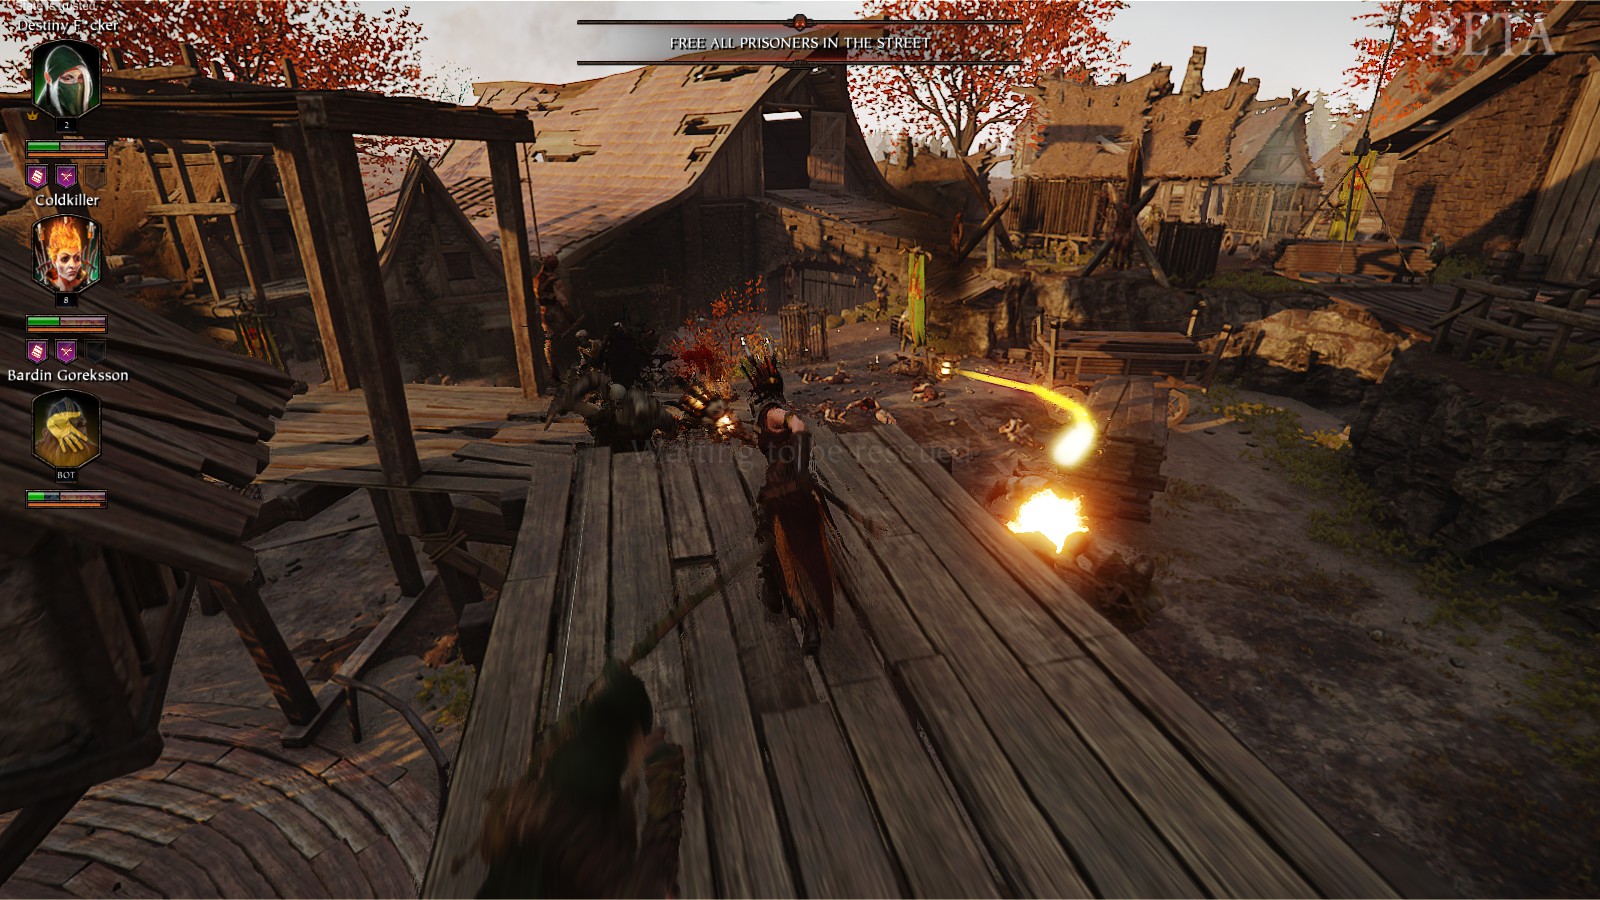 Attacking Vermintide 2 enemies from a high vantage point